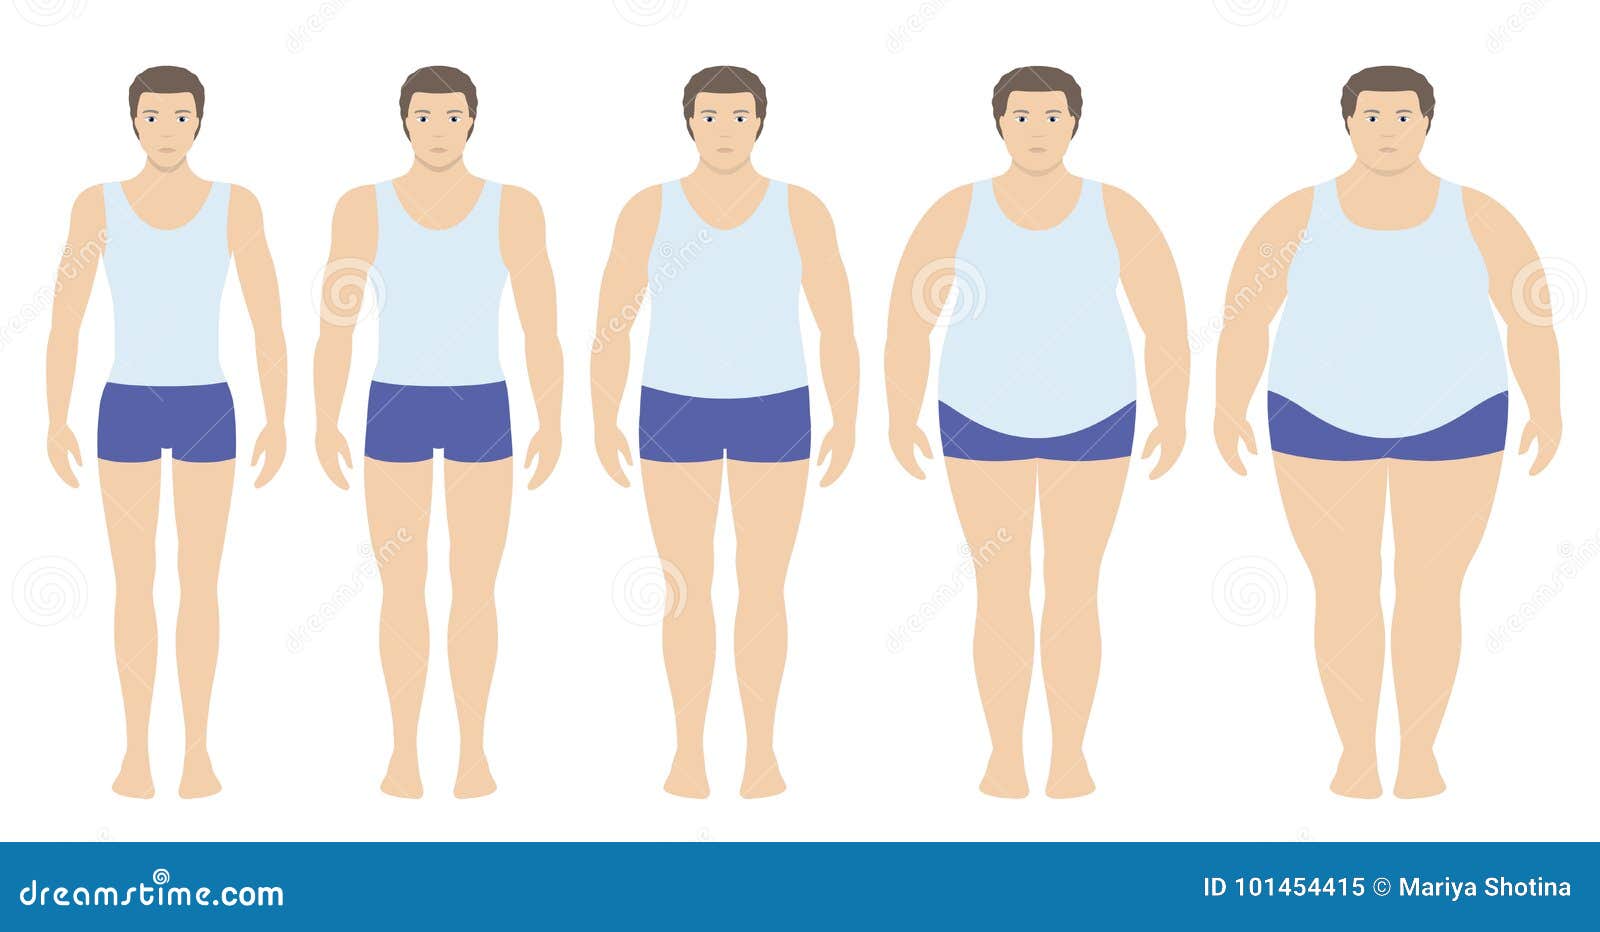 body mass index   from underweight to extremely obese in flat style. man with different obesity degrees.